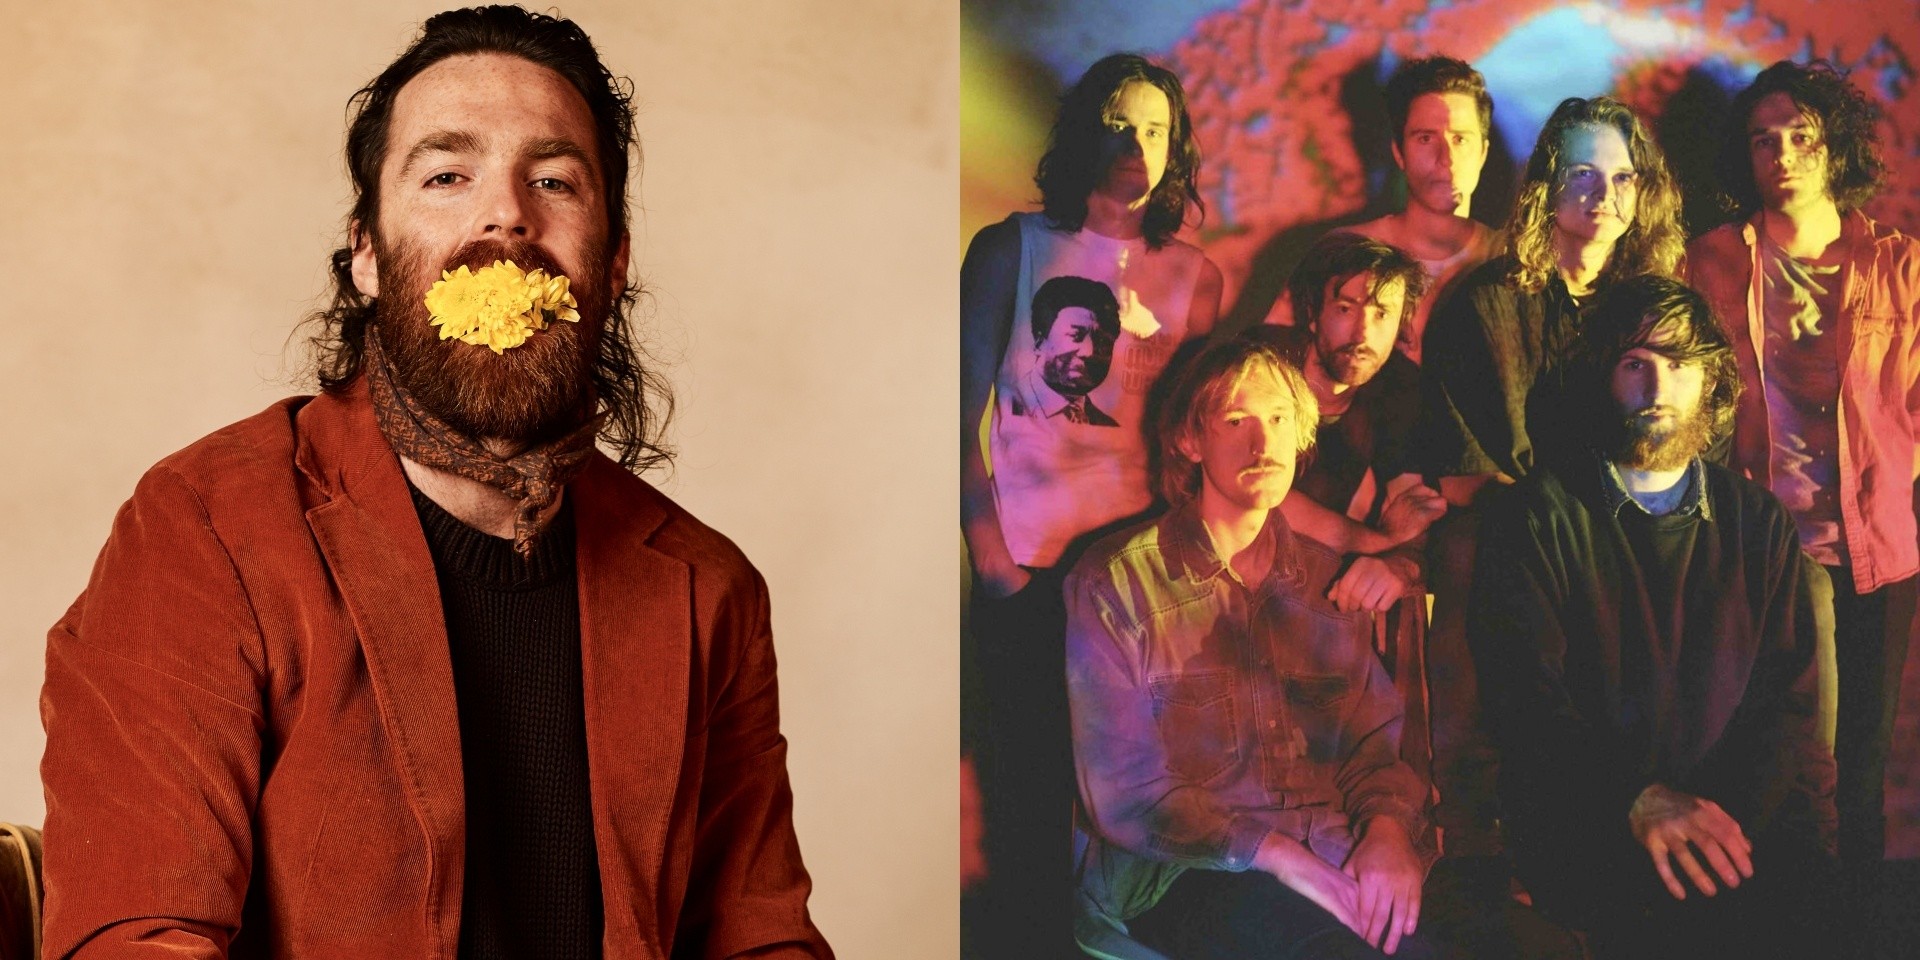 Neon Lights announces expanded lineup – Nick Murphy, King Gizzard & the Lizard Wizard, BADBADNOTGOOD and more confirmed